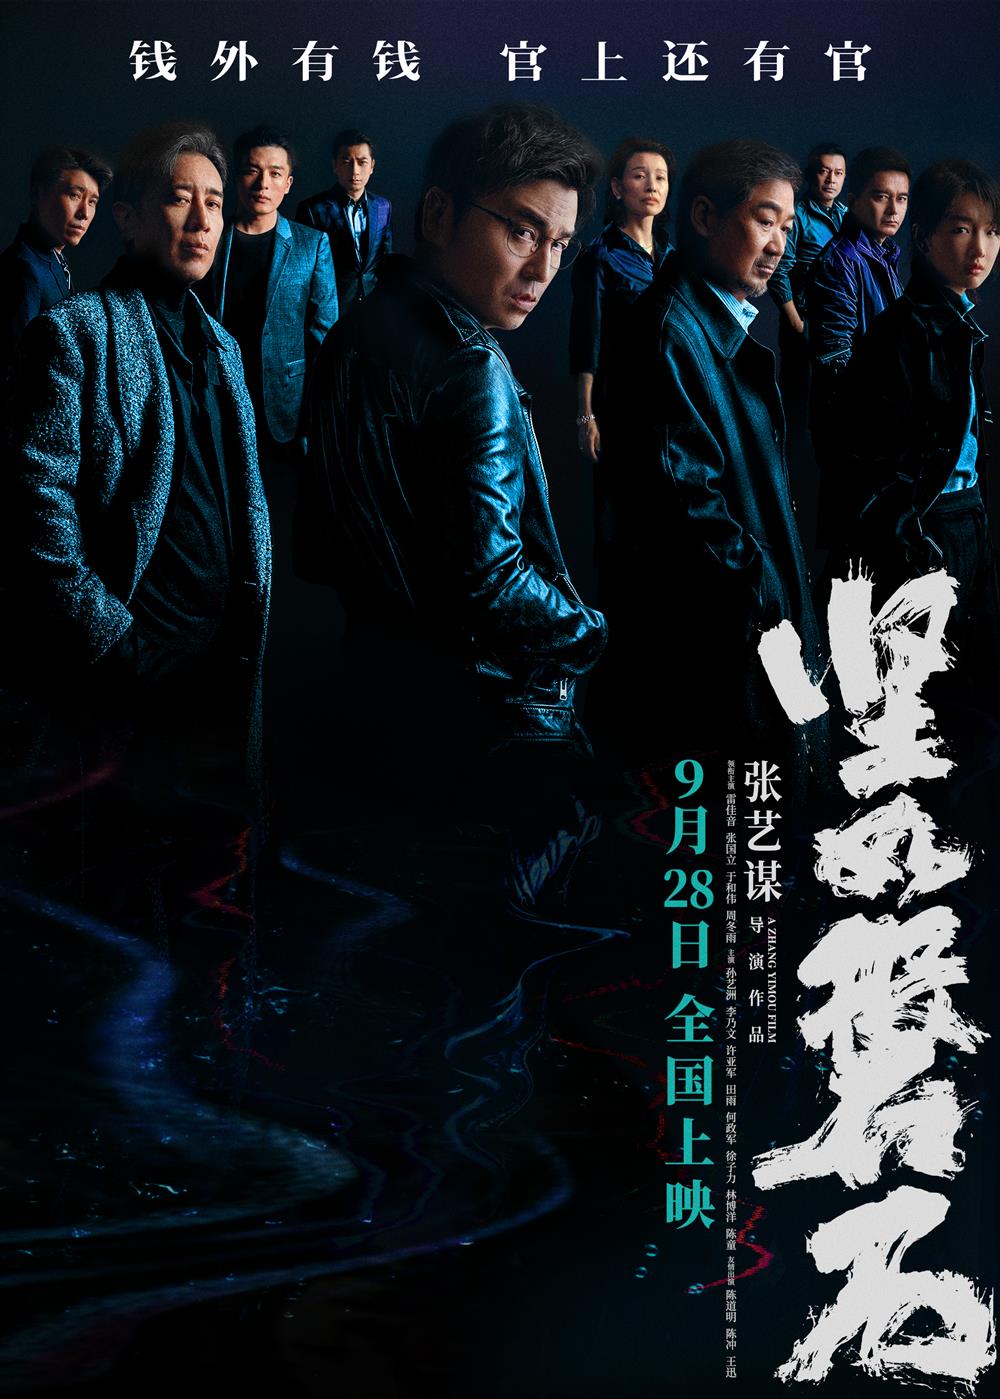 Directed by Zhang Yimou, "Stubborn as a Rock" scheduled for September 28th | Stubborn as a Rock | Human Nature | Zhang Yimou